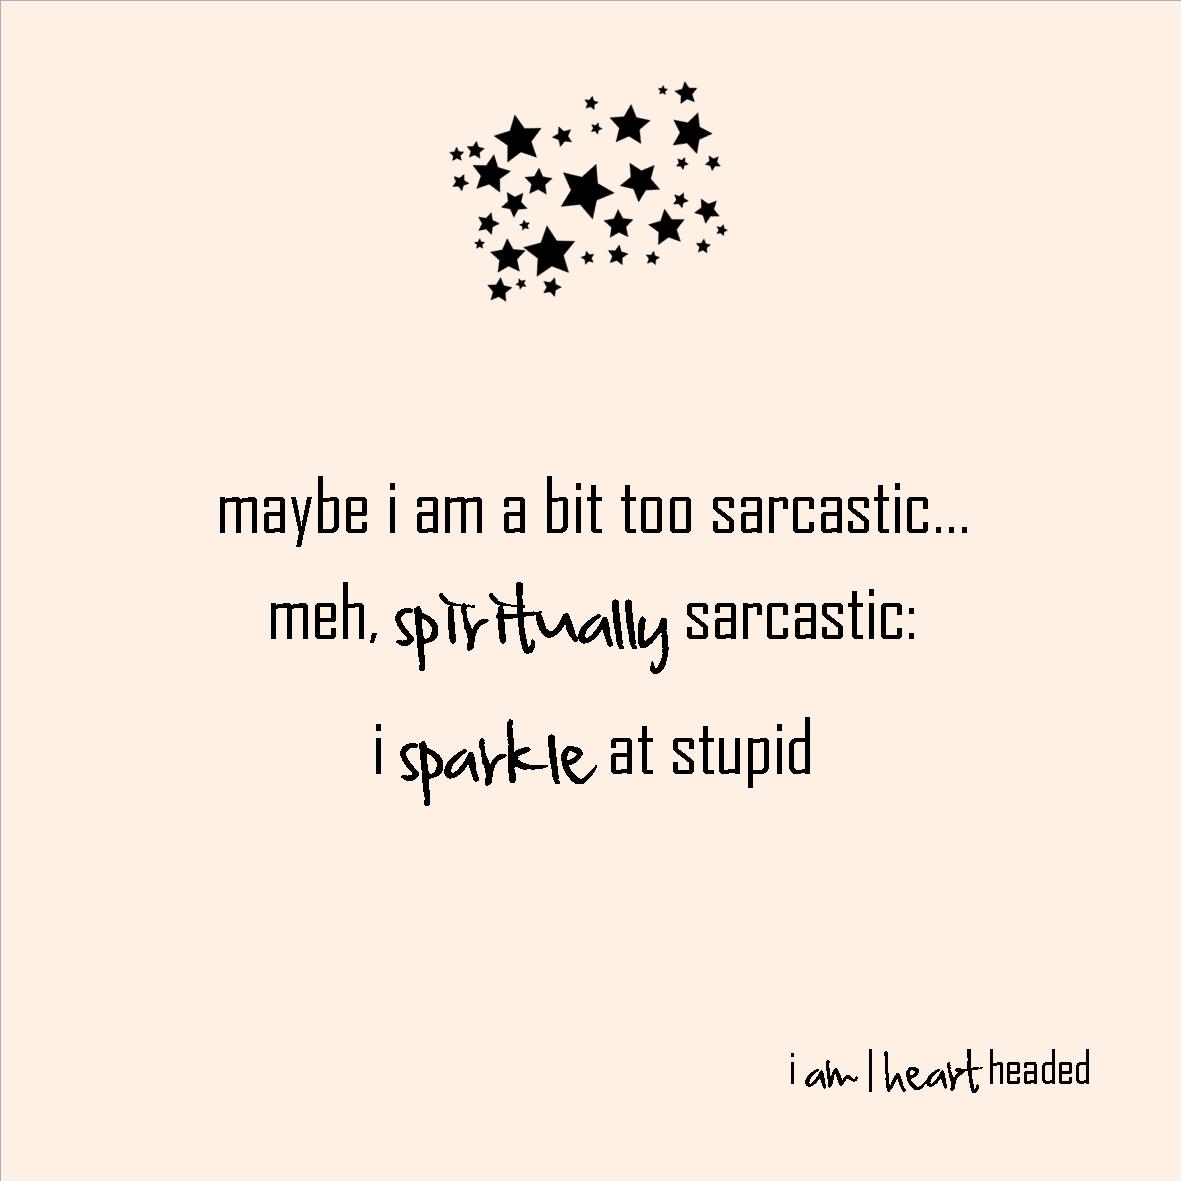 full-size featured image of quote 'spiritually sarcastic' in category 'irony' at i am | heart headed